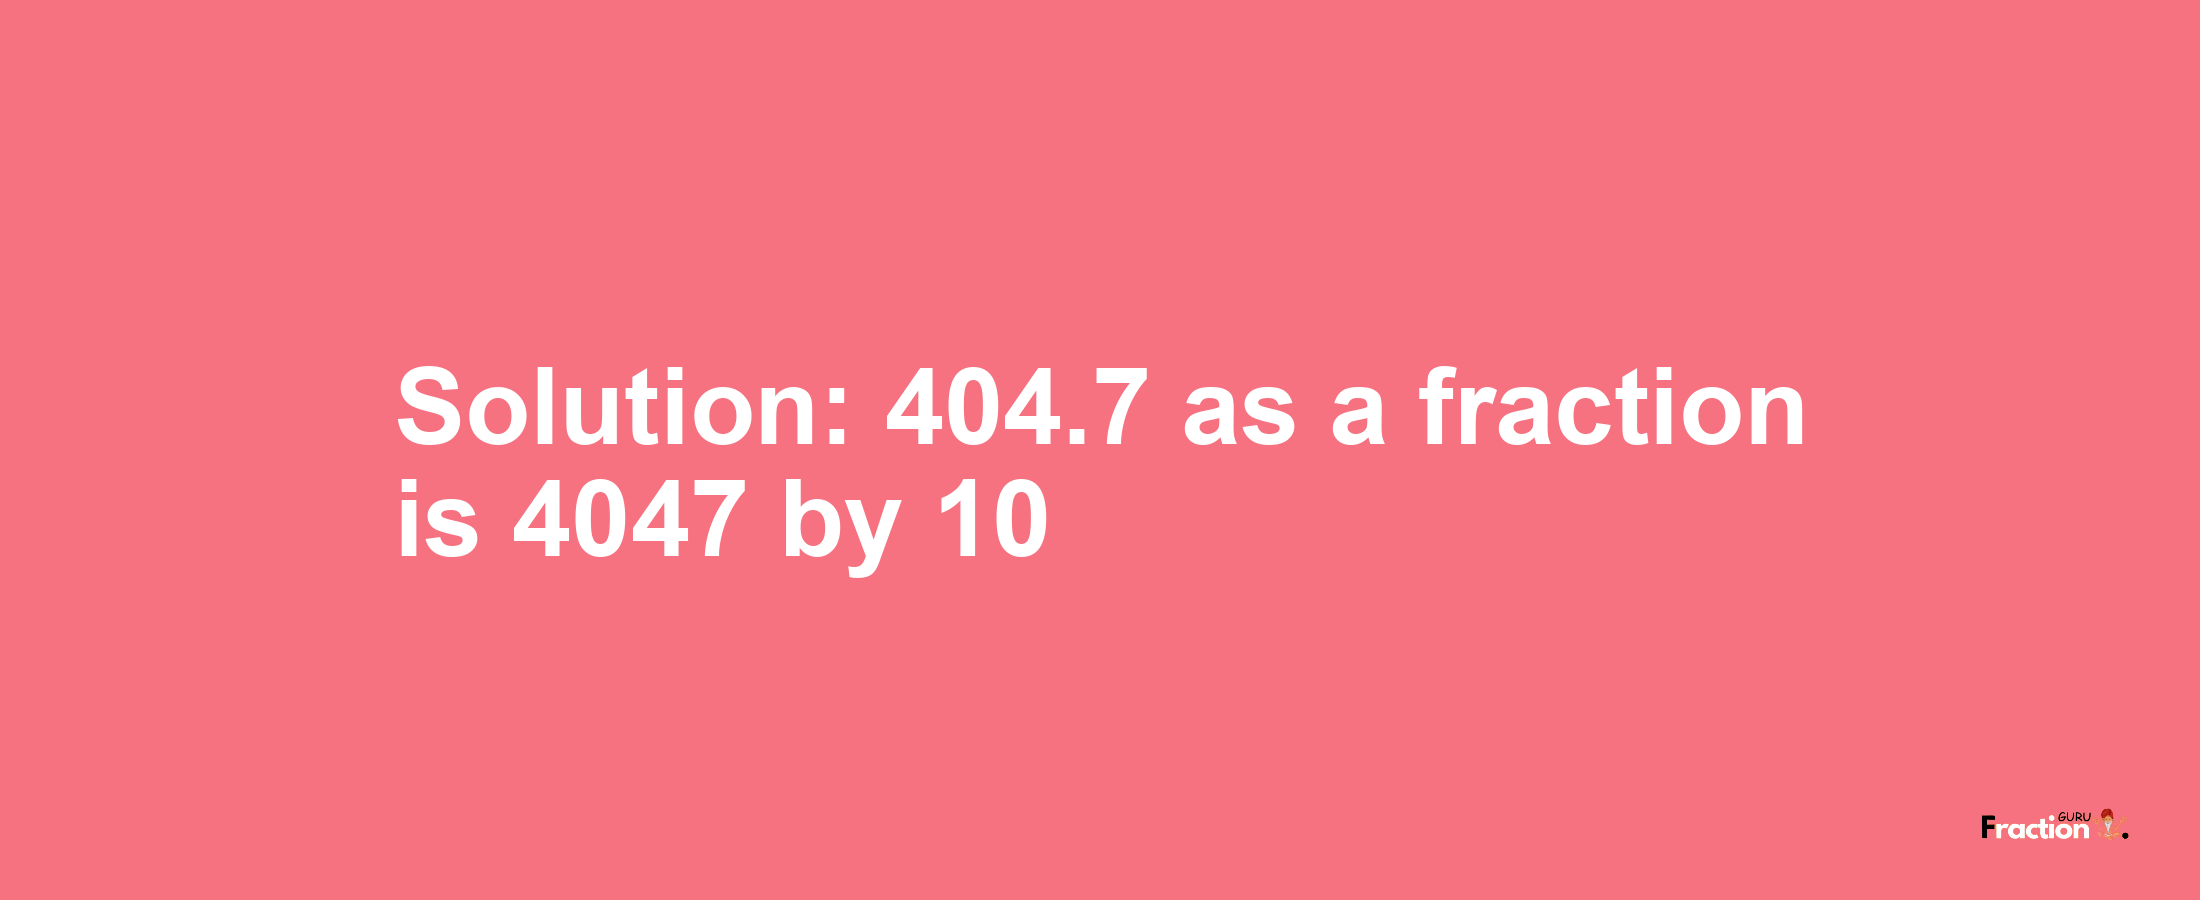 Solution:404.7 as a fraction is 4047/10